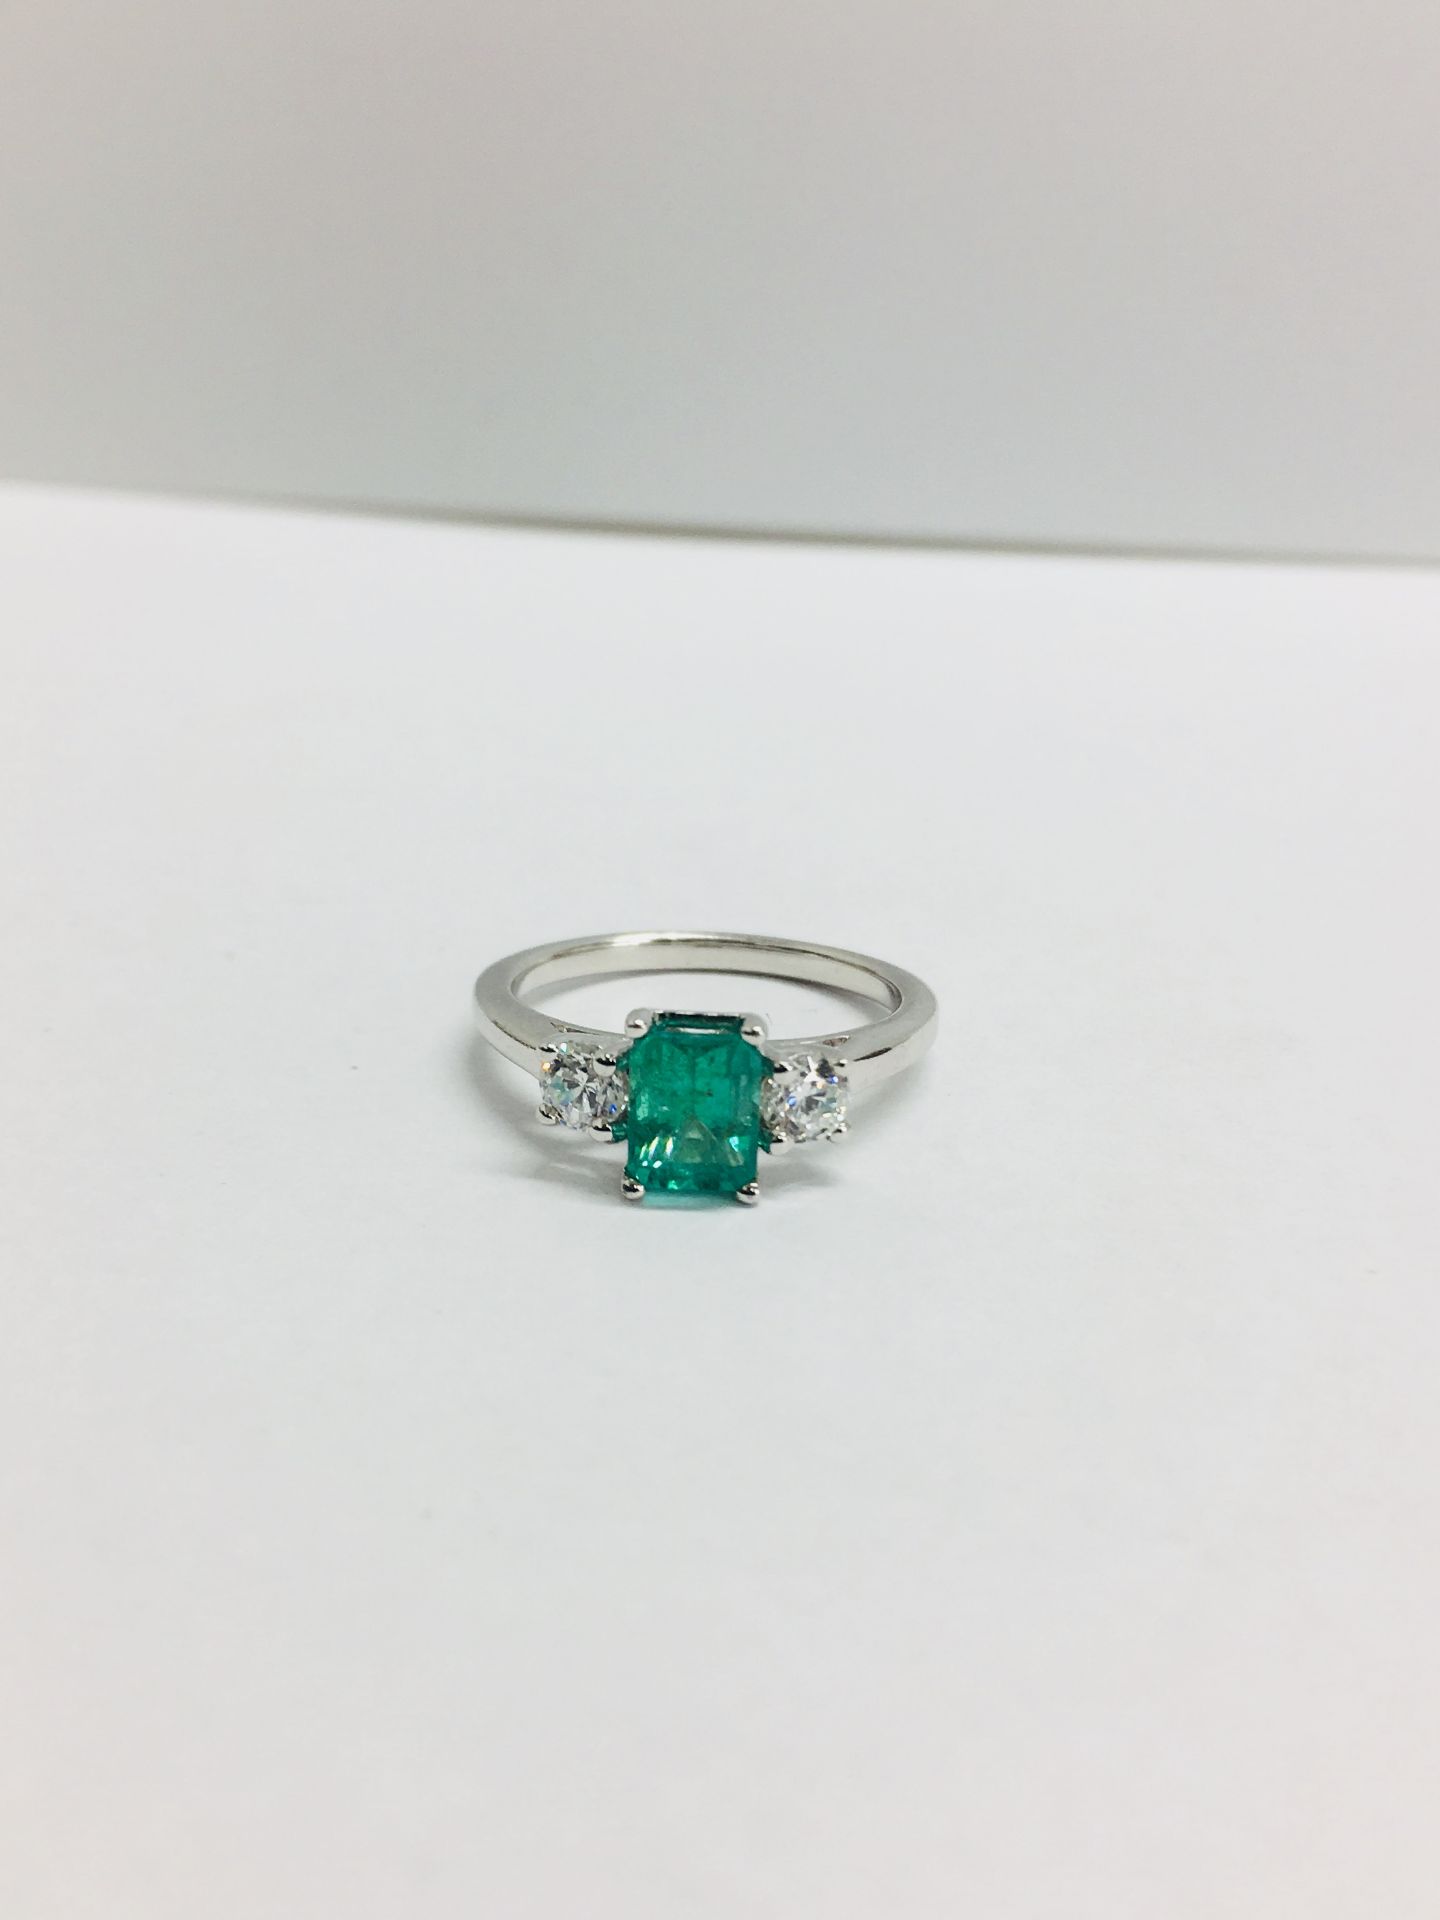 Emerald and diamond trilogy style ring. Rectangular cut emerald ( treated ) 0.70ct with a - Image 3 of 5